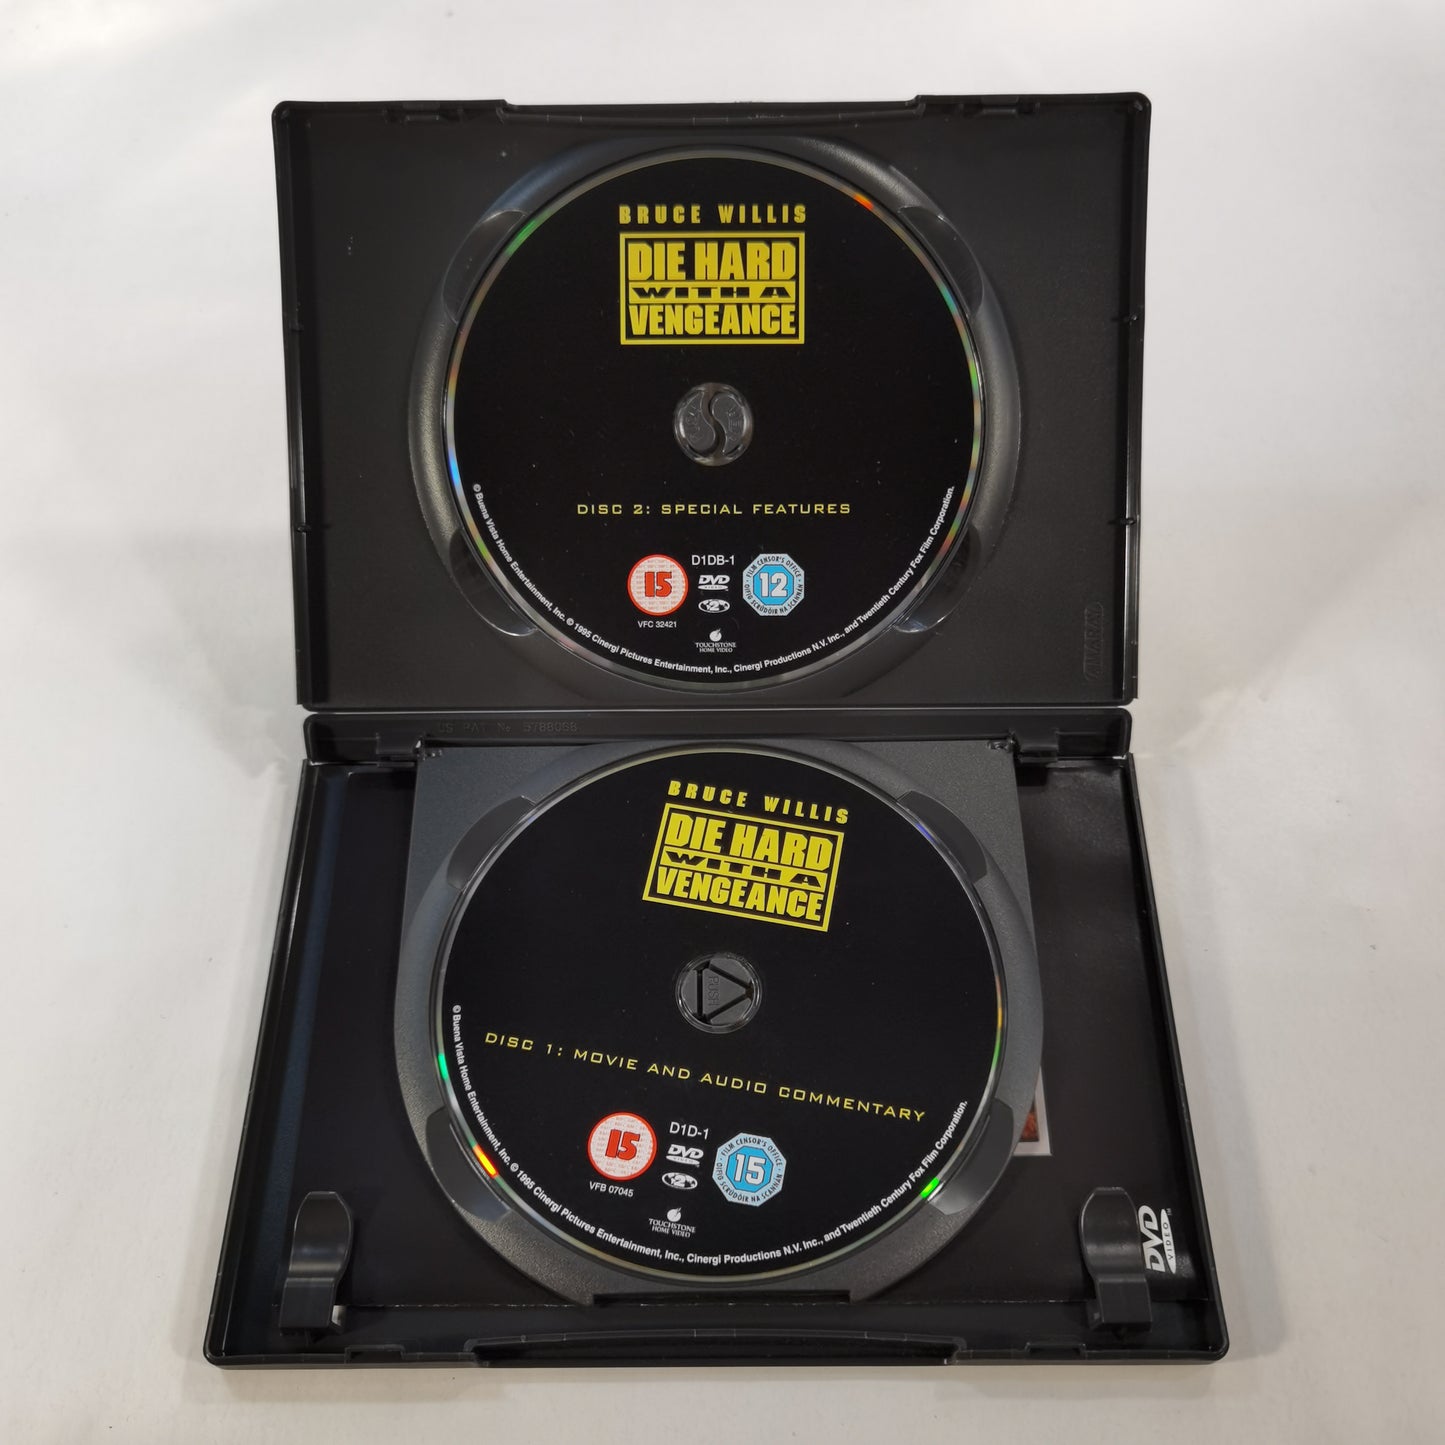 Die Hard with a Vengeance (1995) - DVD UK 2-Disc Collector's Edition